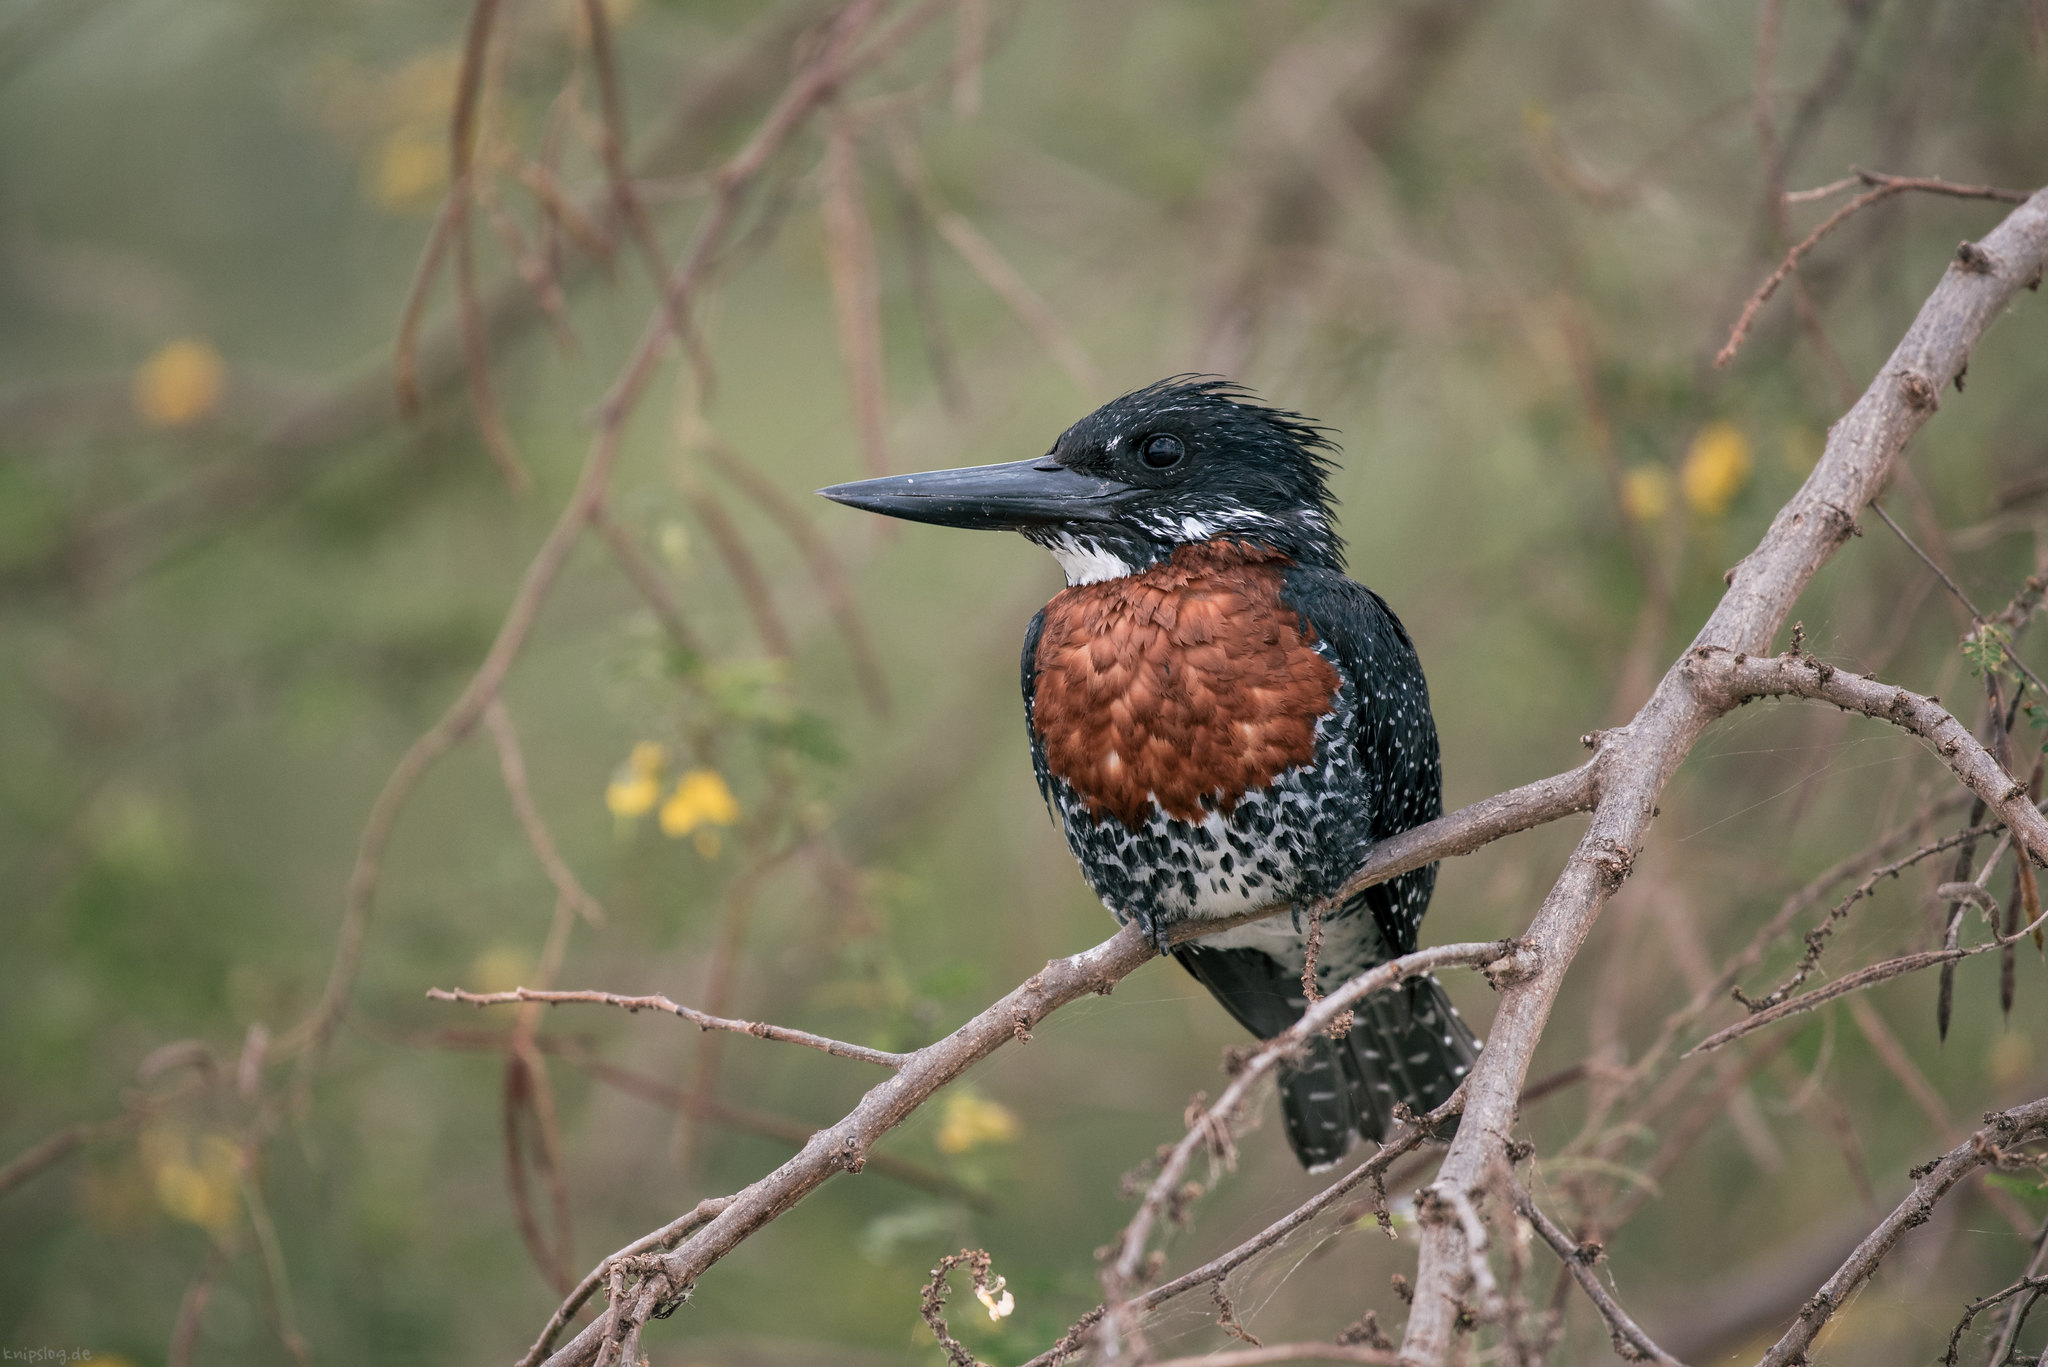 Cousin of the kingfishers